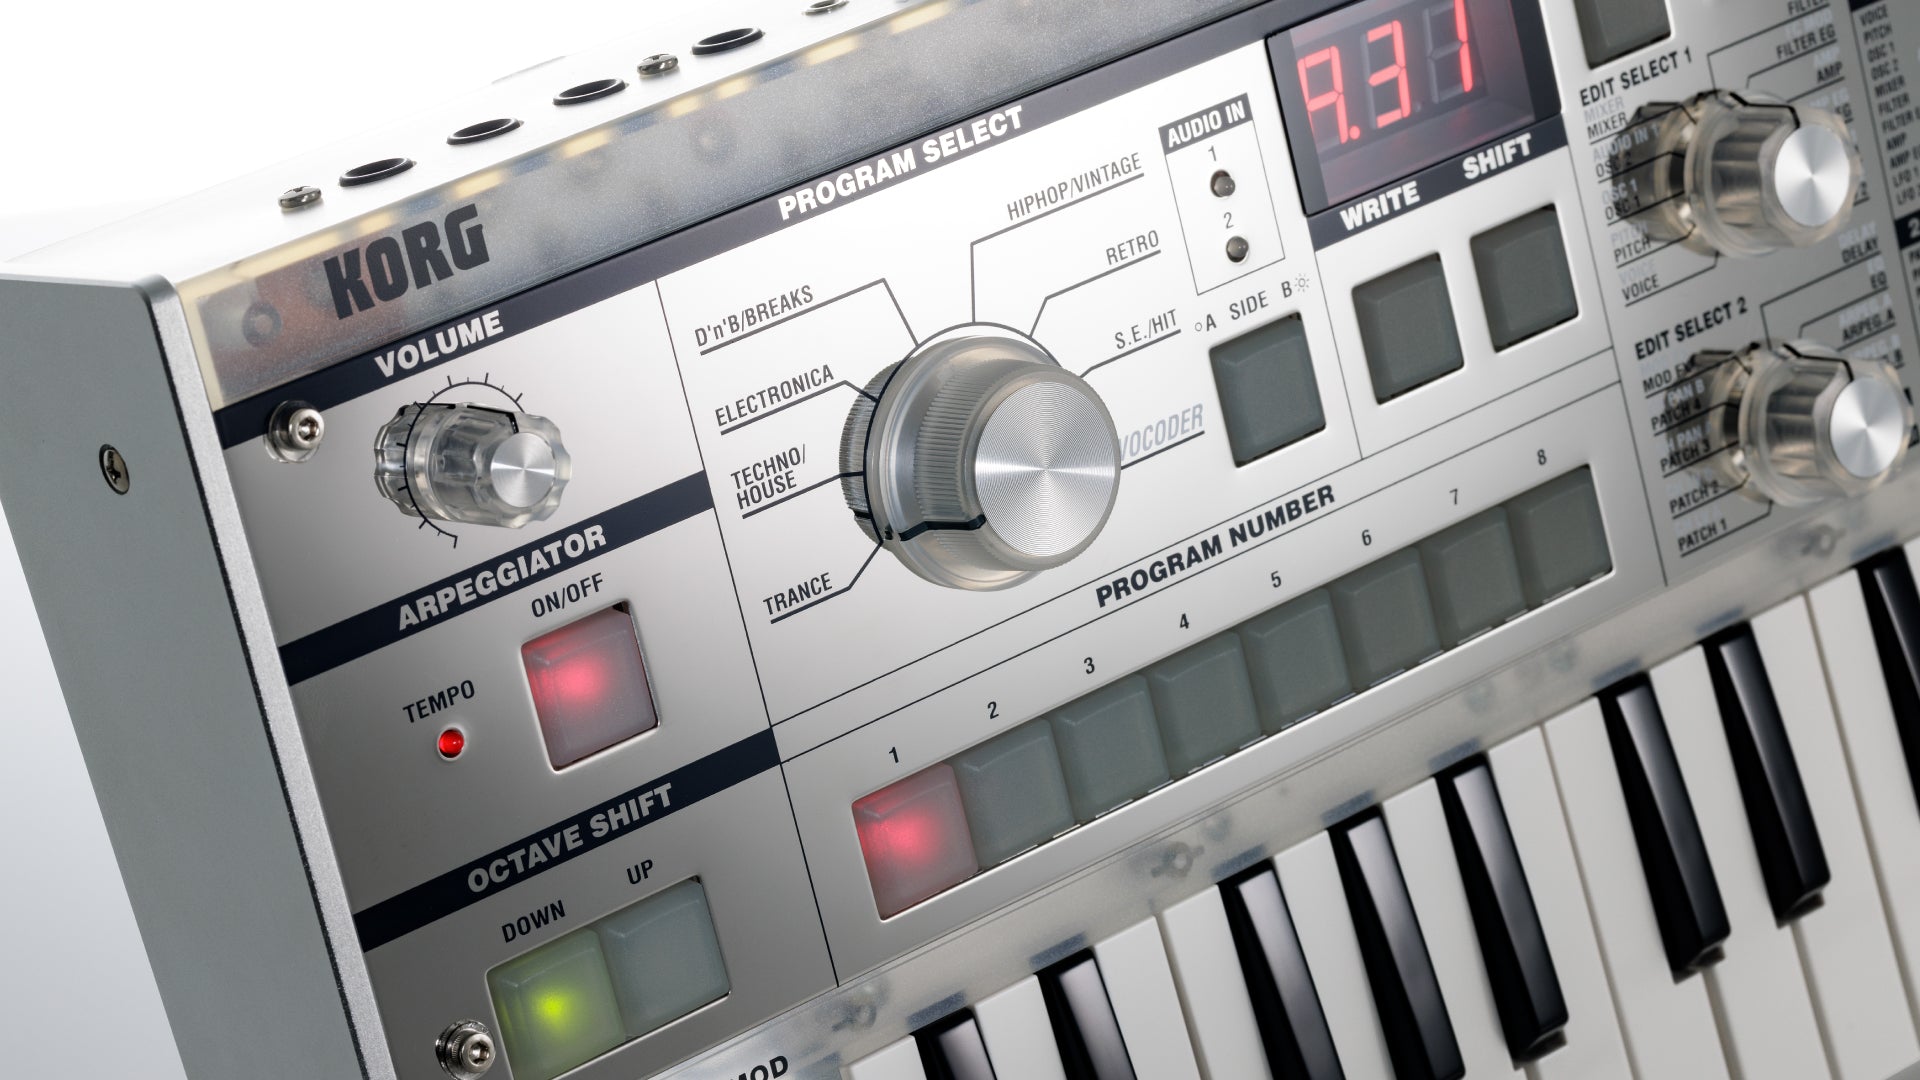 microKORG Crystal: A shining homage to two decades of microKORG legacy by KORG